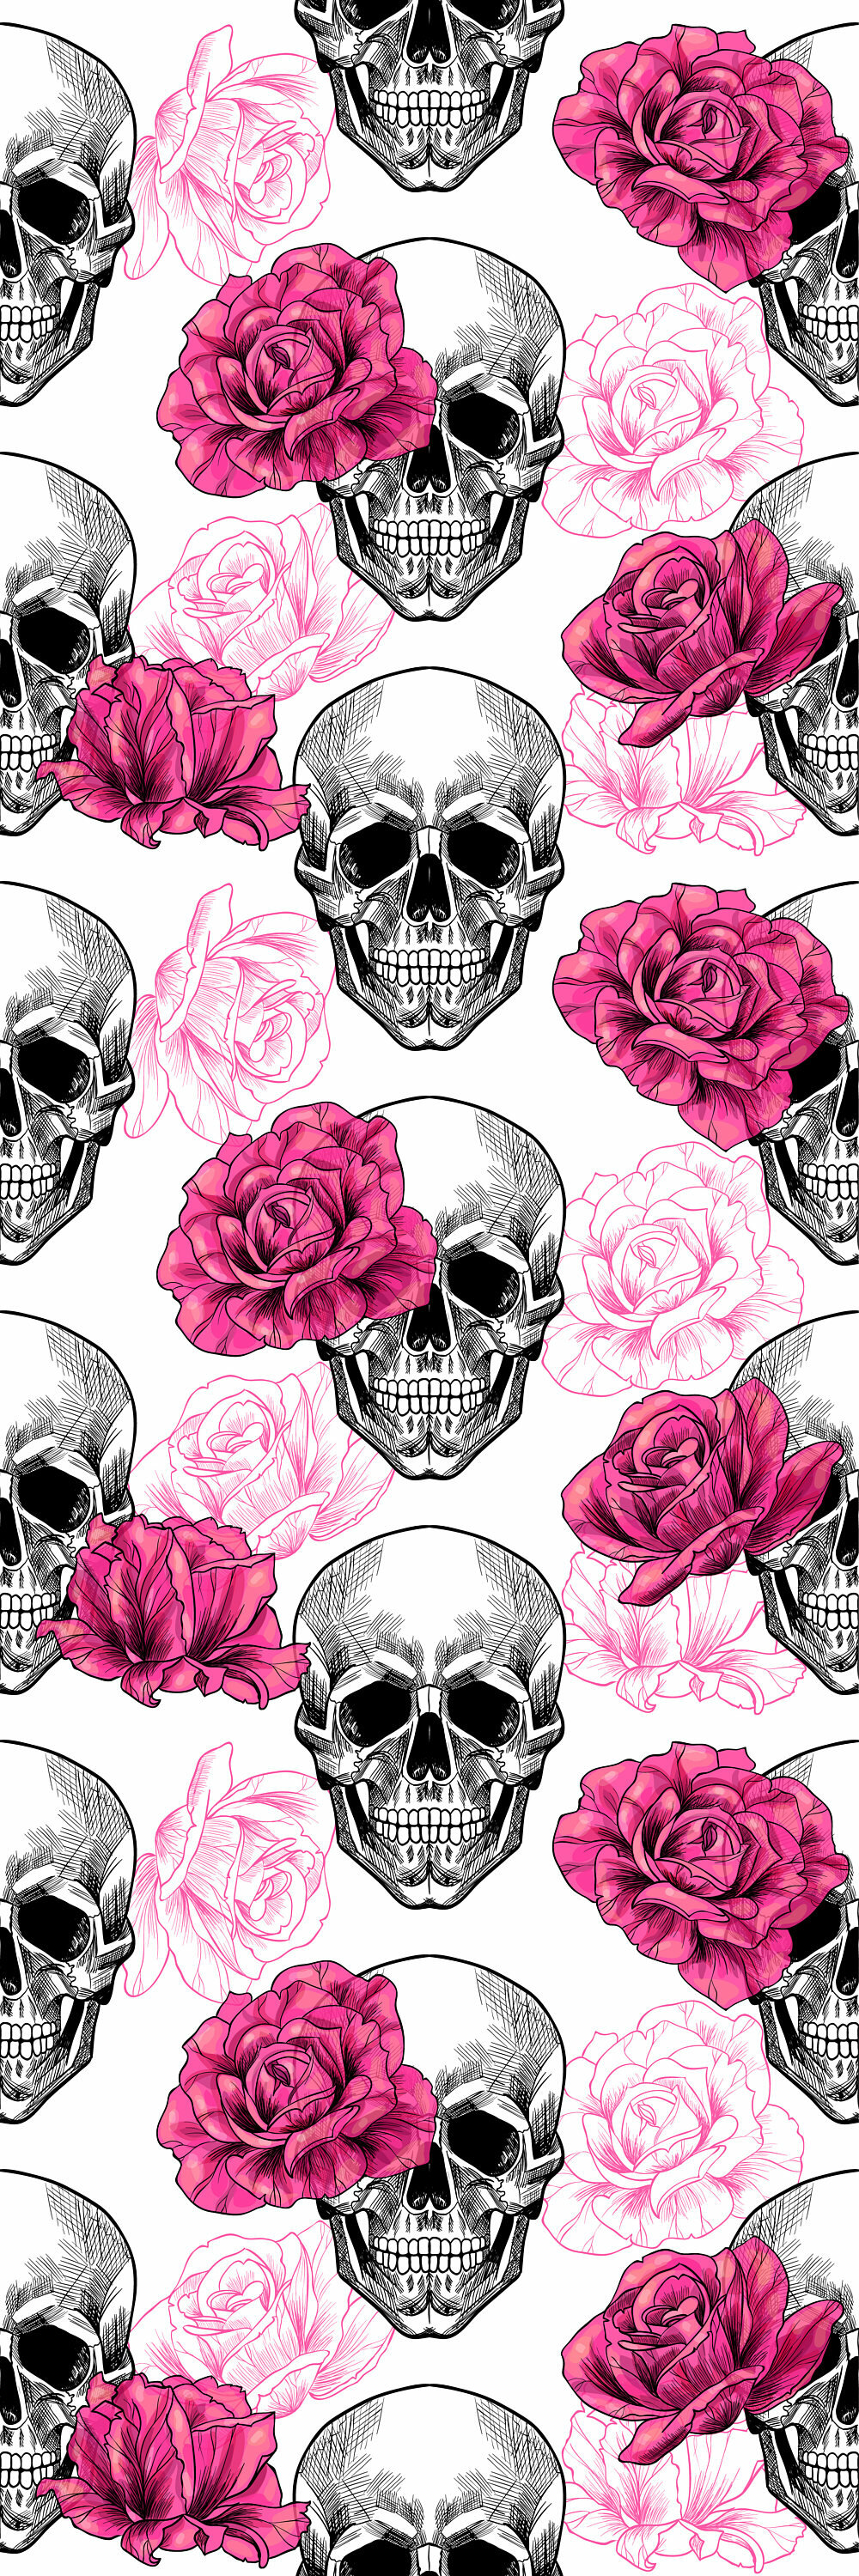 Ebern Designs Aston Removable Skull Roses L X W Peel And